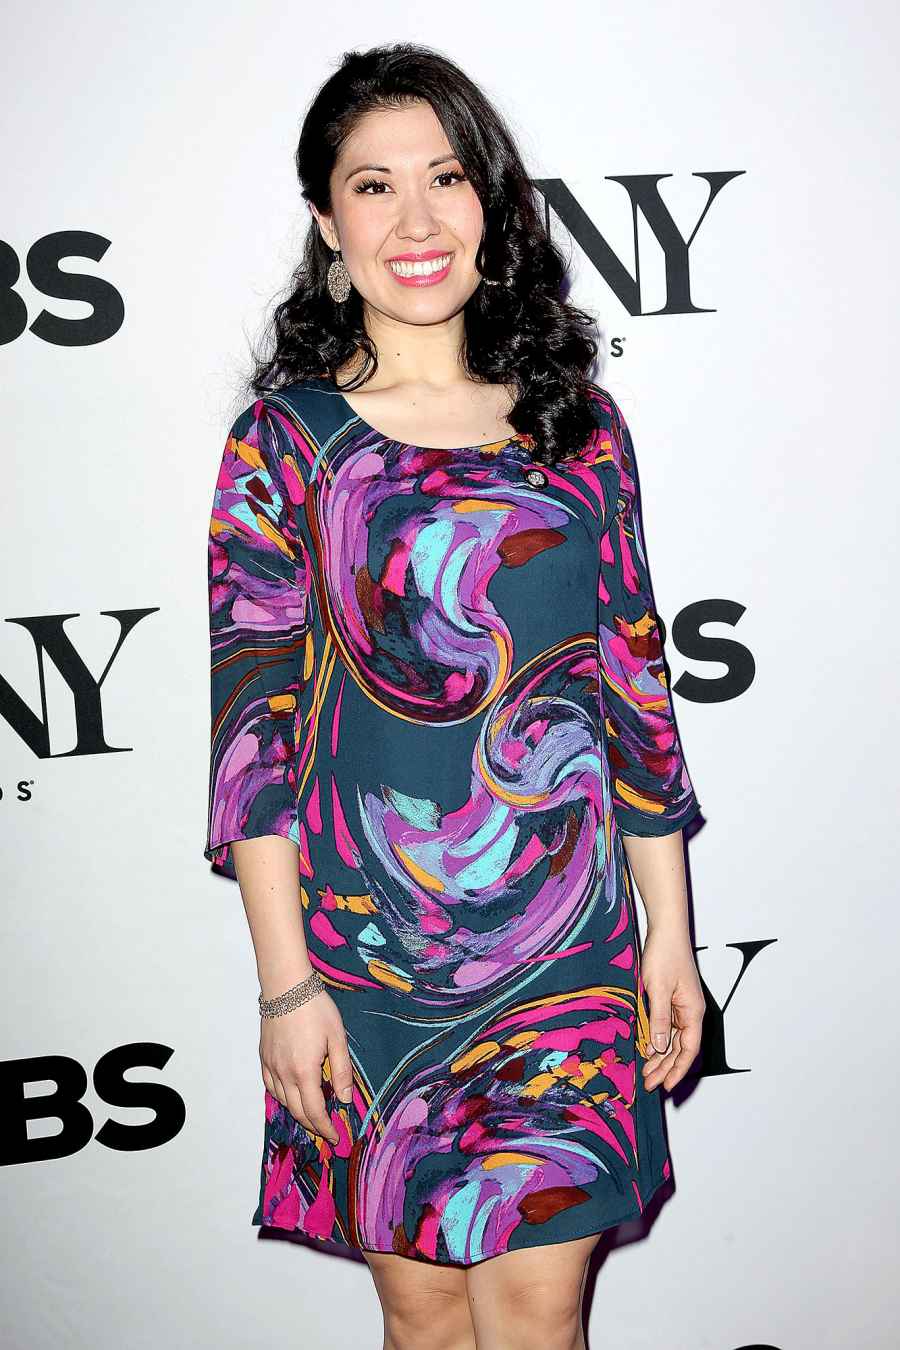 5 Things to Know About Broadway Star Ruthie Ann Miles